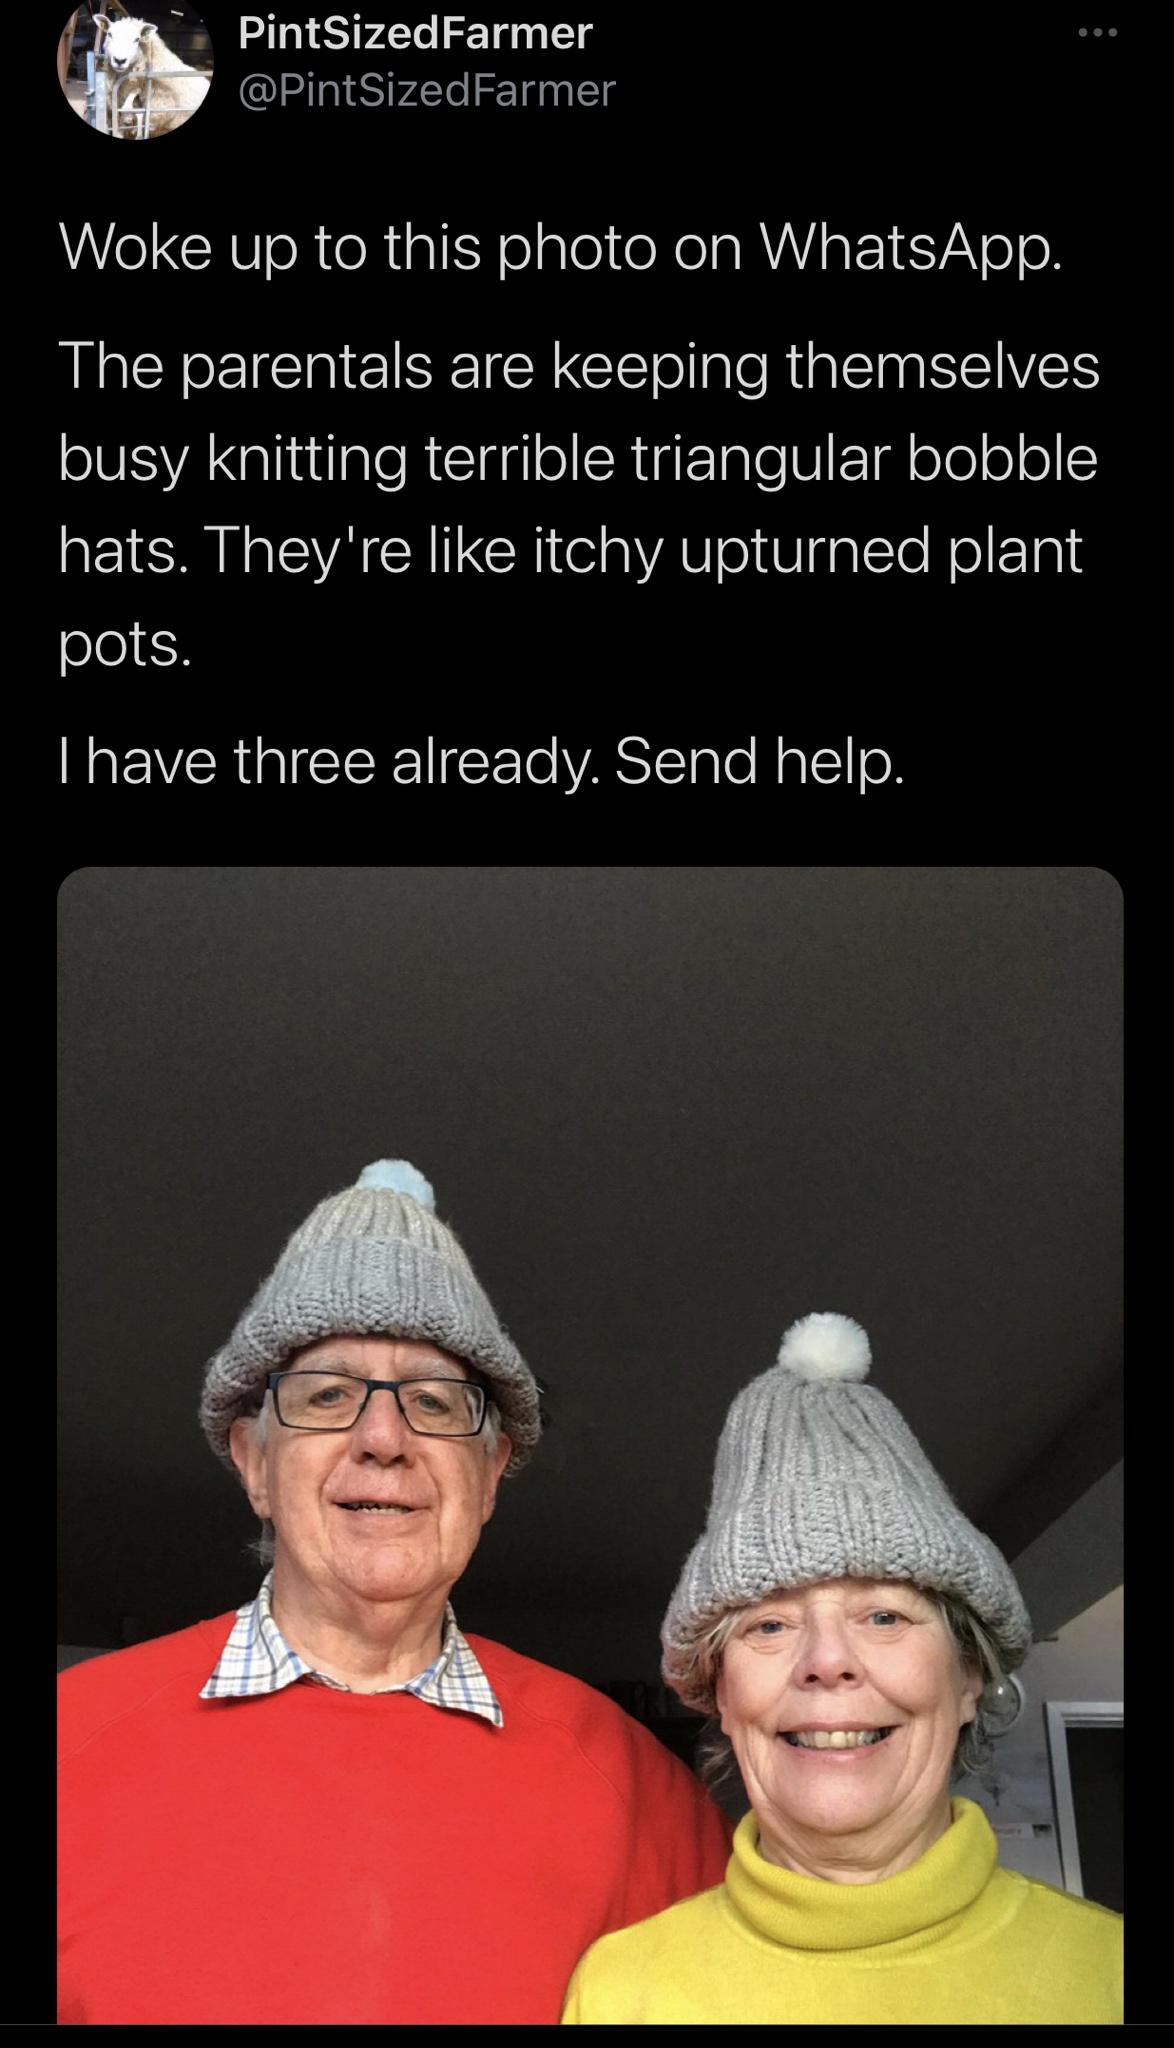 photo caption - PintSizedFarmer Woke up to this photo on WhatsApp. The parentals are keeping themselves busy knitting terrible triangular bobble hats. They're itchy upturned plant pots. Thave three already. Send help.